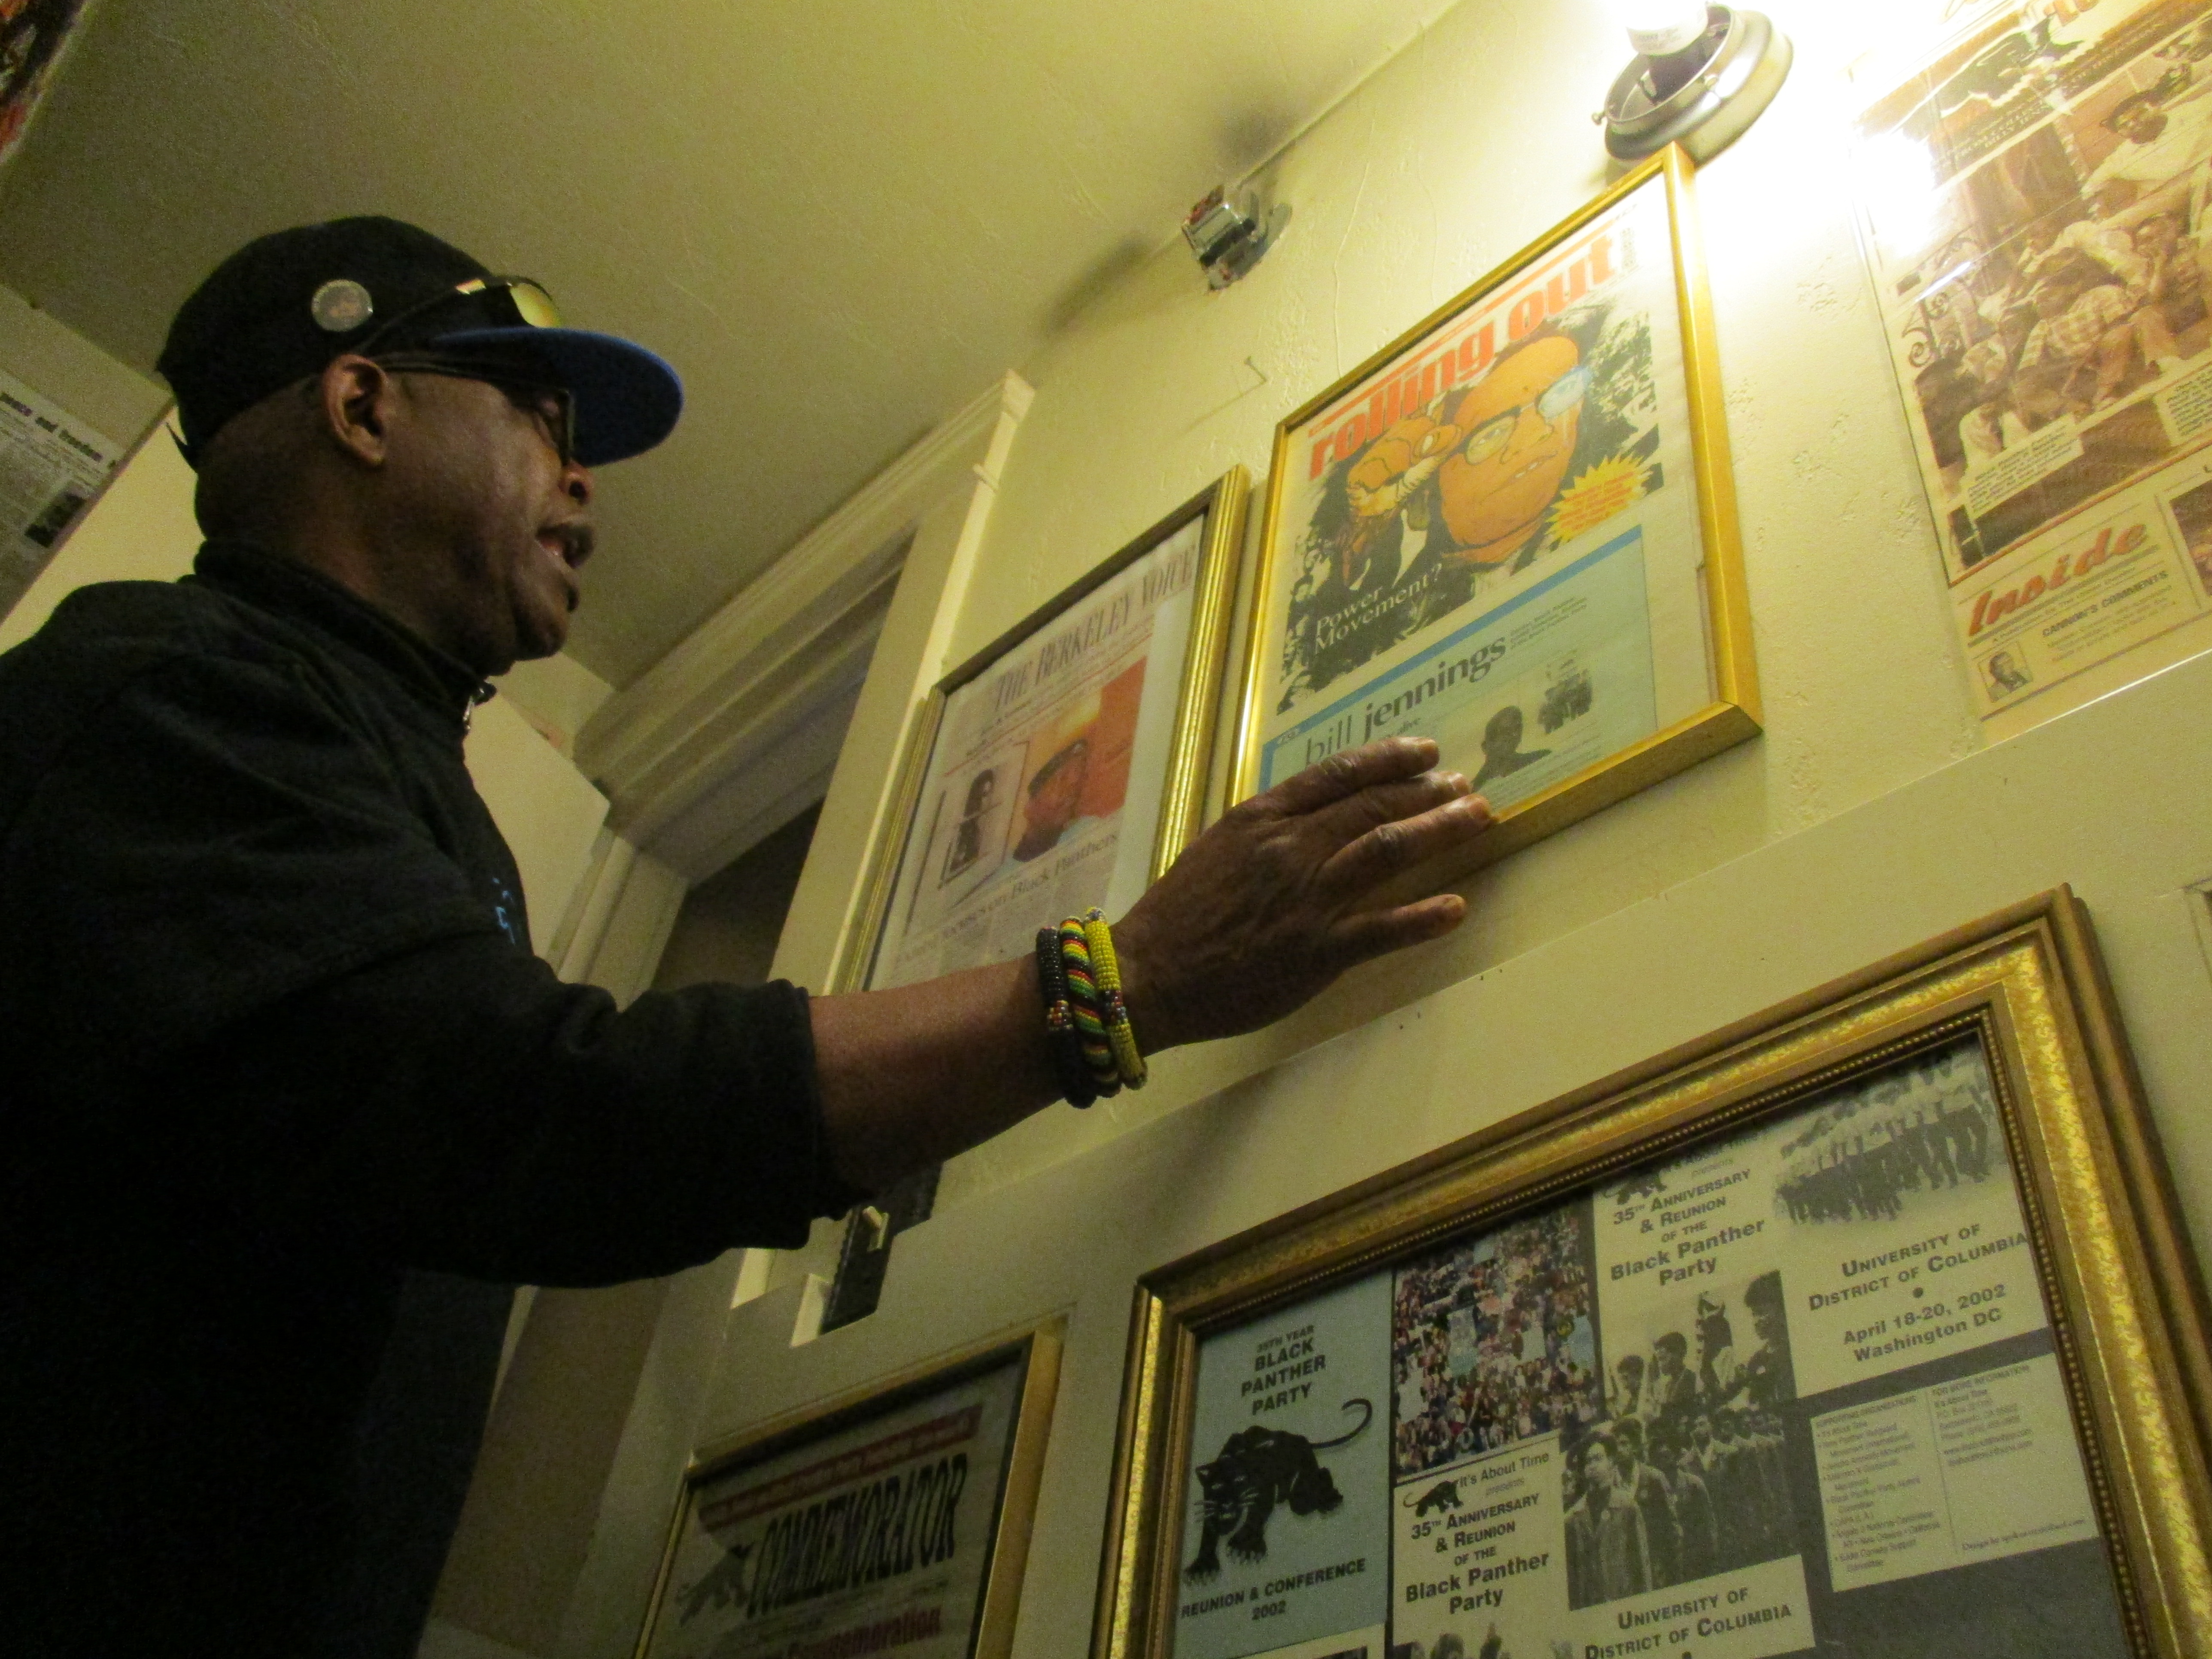 The walls of Billy X Jennings home are covered with Black Panther memorabilia. 